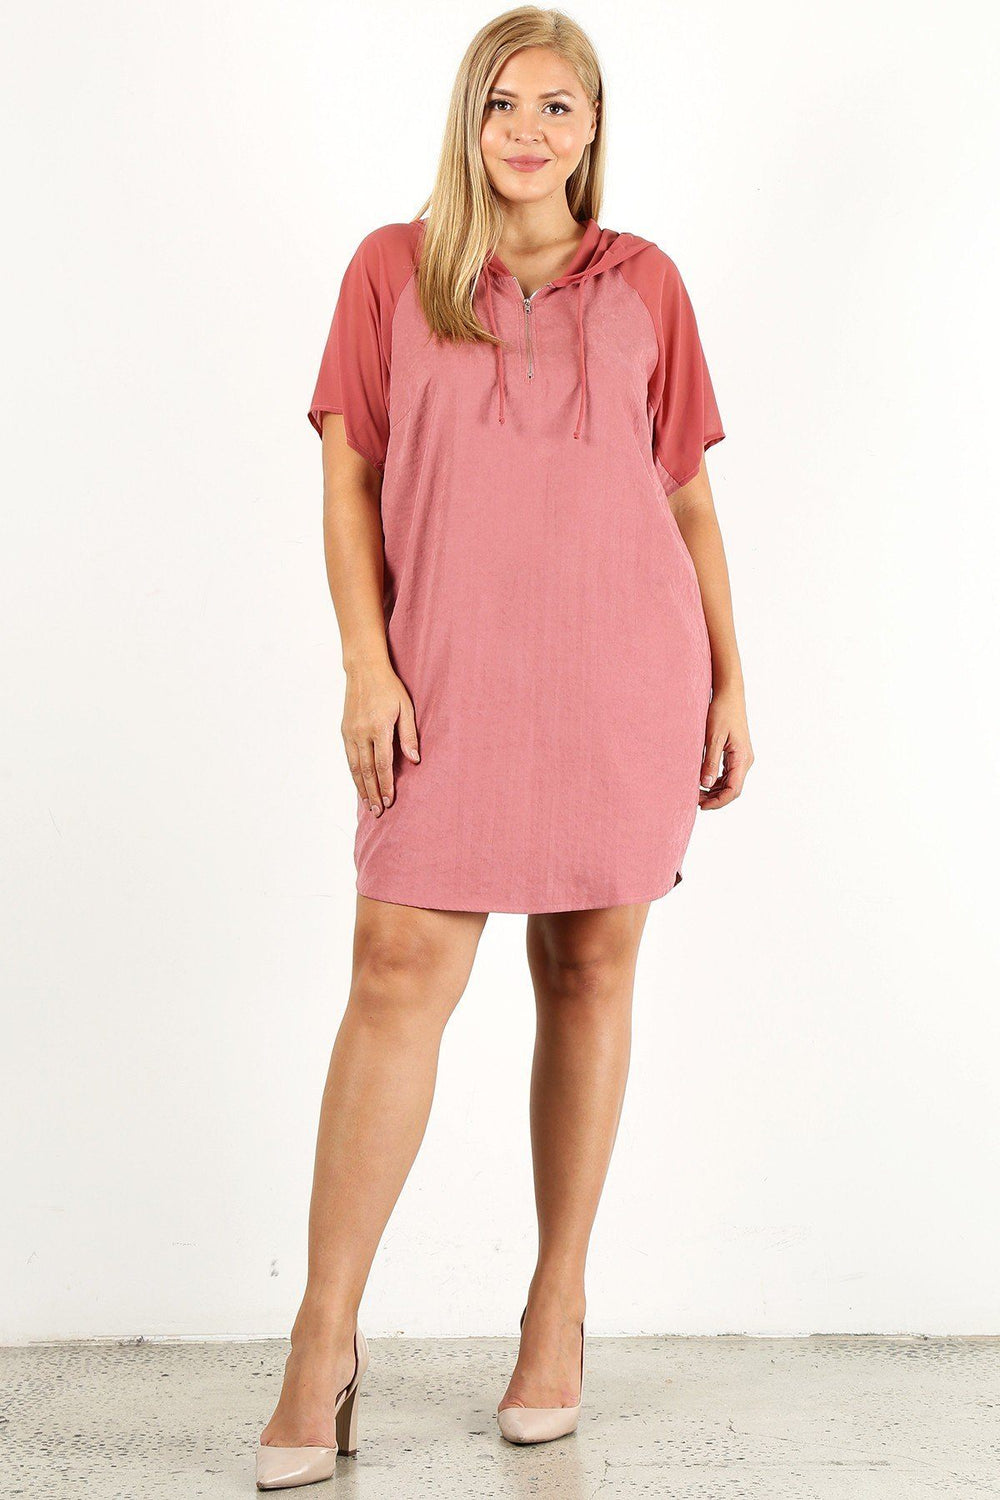 Plus Size Solid Mauve Dress with Zip-Up Closure and Hoodie